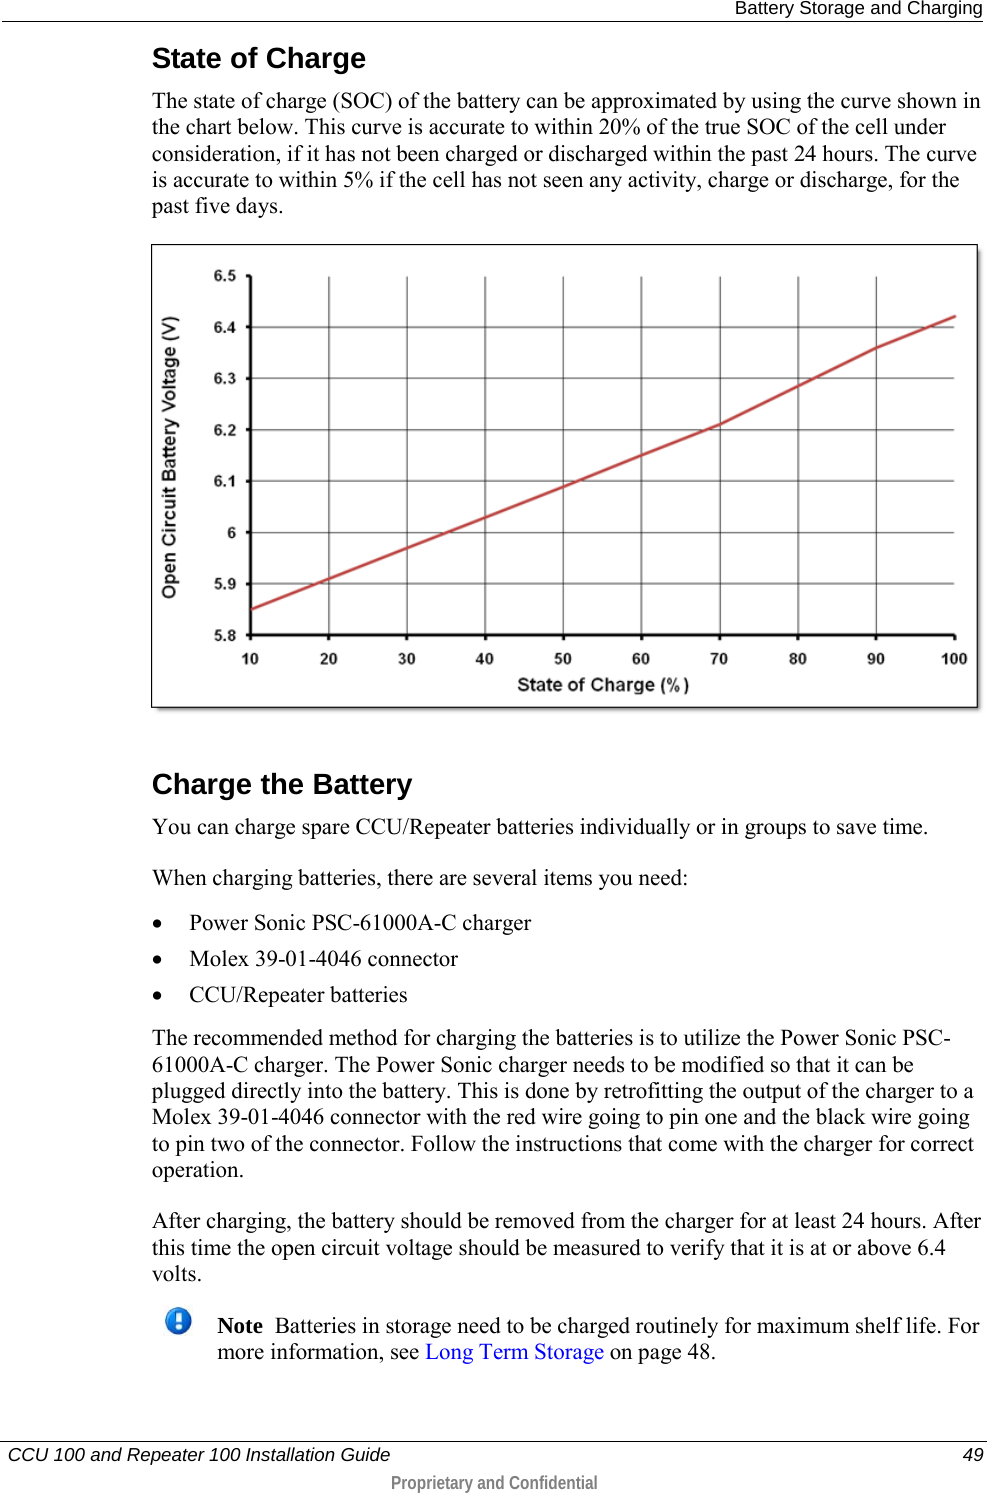   Battery Storage and Charging   CCU 100 and Repeater 100 Installation Guide    49  Proprietary and Confidential  State of Charge The state of charge (SOC) of the battery can be approximated by using the curve shown in the chart below. This curve is accurate to within 20% of the true SOC of the cell under consideration, if it has not been charged or discharged within the past 24 hours. The curve is accurate to within 5% if the cell has not seen any activity, charge or discharge, for the past five days.   Charge the Battery You can charge spare CCU/Repeater batteries individually or in groups to save time.  When charging batteries, there are several items you need:  • Power Sonic PSC-61000A-C charger • Molex 39-01-4046 connector • CCU/Repeater batteries The recommended method for charging the batteries is to utilize the Power Sonic PSC-61000A-C charger. The Power Sonic charger needs to be modified so that it can be plugged directly into the battery. This is done by retrofitting the output of the charger to a Molex 39-01-4046 connector with the red wire going to pin one and the black wire going to pin two of the connector. Follow the instructions that come with the charger for correct operation. After charging, the battery should be removed from the charger for at least 24 hours. After this time the open circuit voltage should be measured to verify that it is at or above 6.4 volts.   Note  Batteries in storage need to be charged routinely for maximum shelf life. For more information, see Long Term Storage on page 48.    